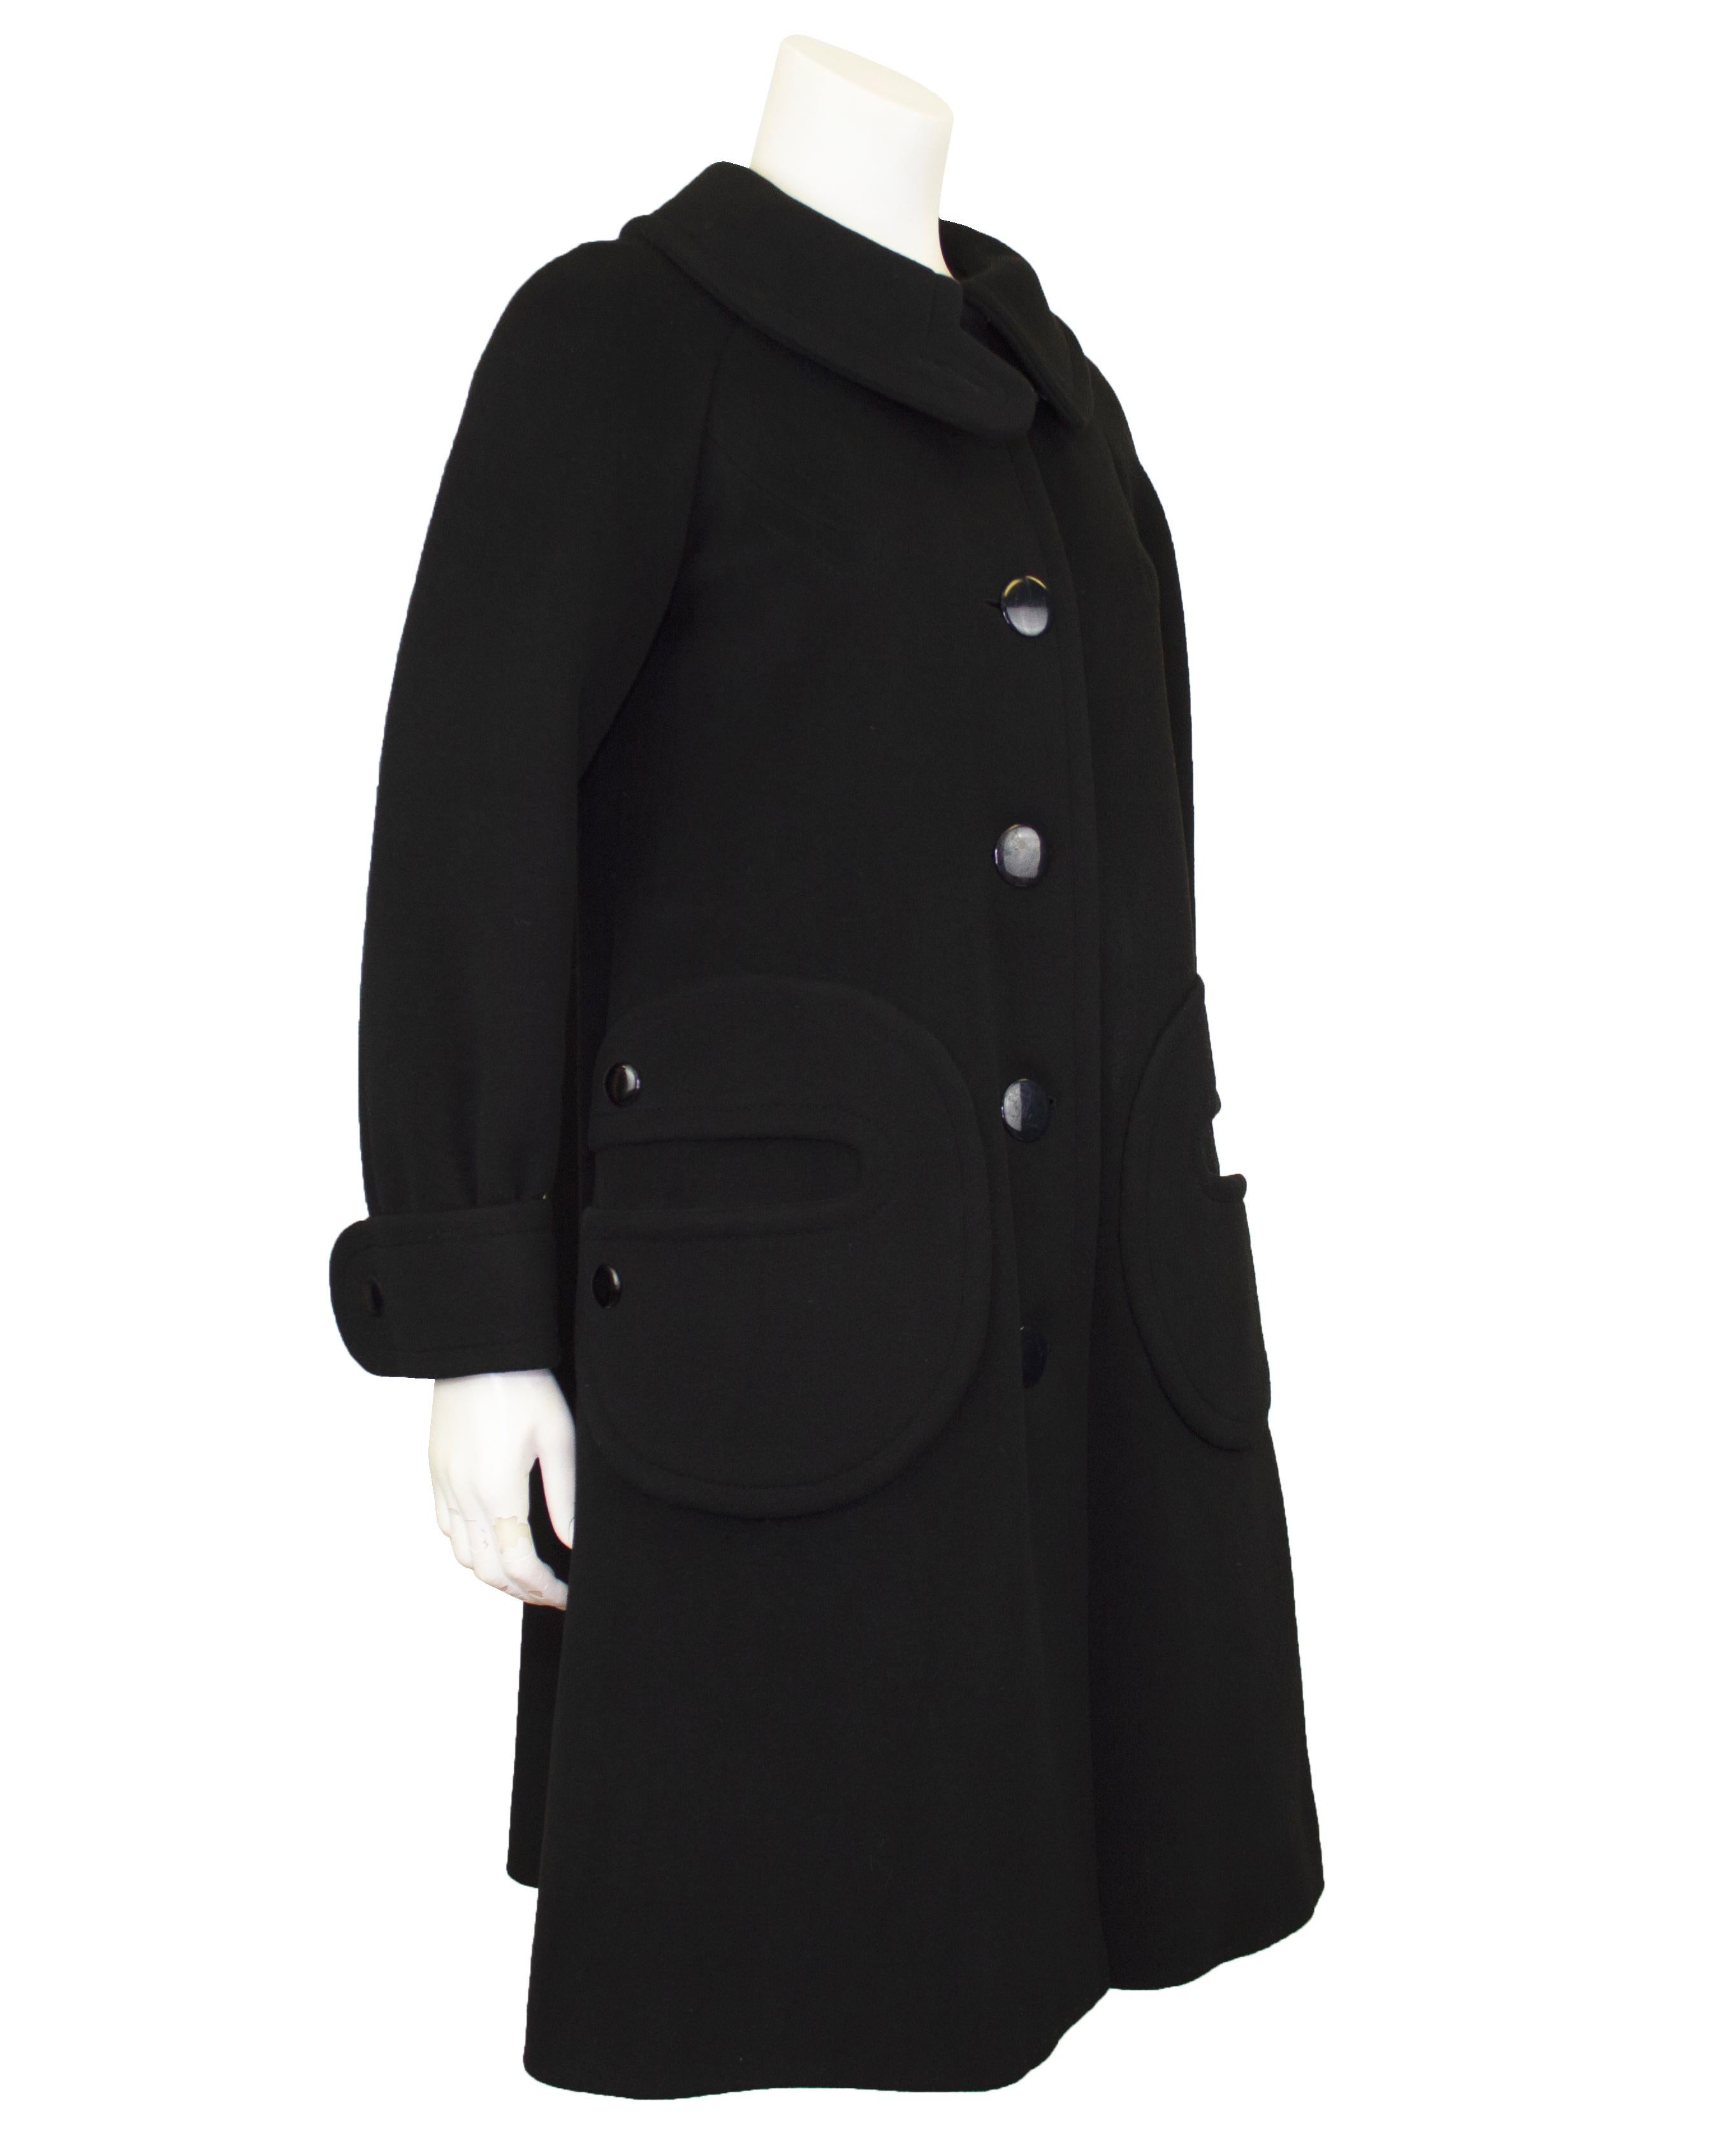 This Pierre Cardin black wool coat from the 1960s is a striking and iconic piece of fashion from the era. It exemplifies Cardin's avant-garde approach to design and his innovative vision of futuristic fashion. Made from high-quality black wool,